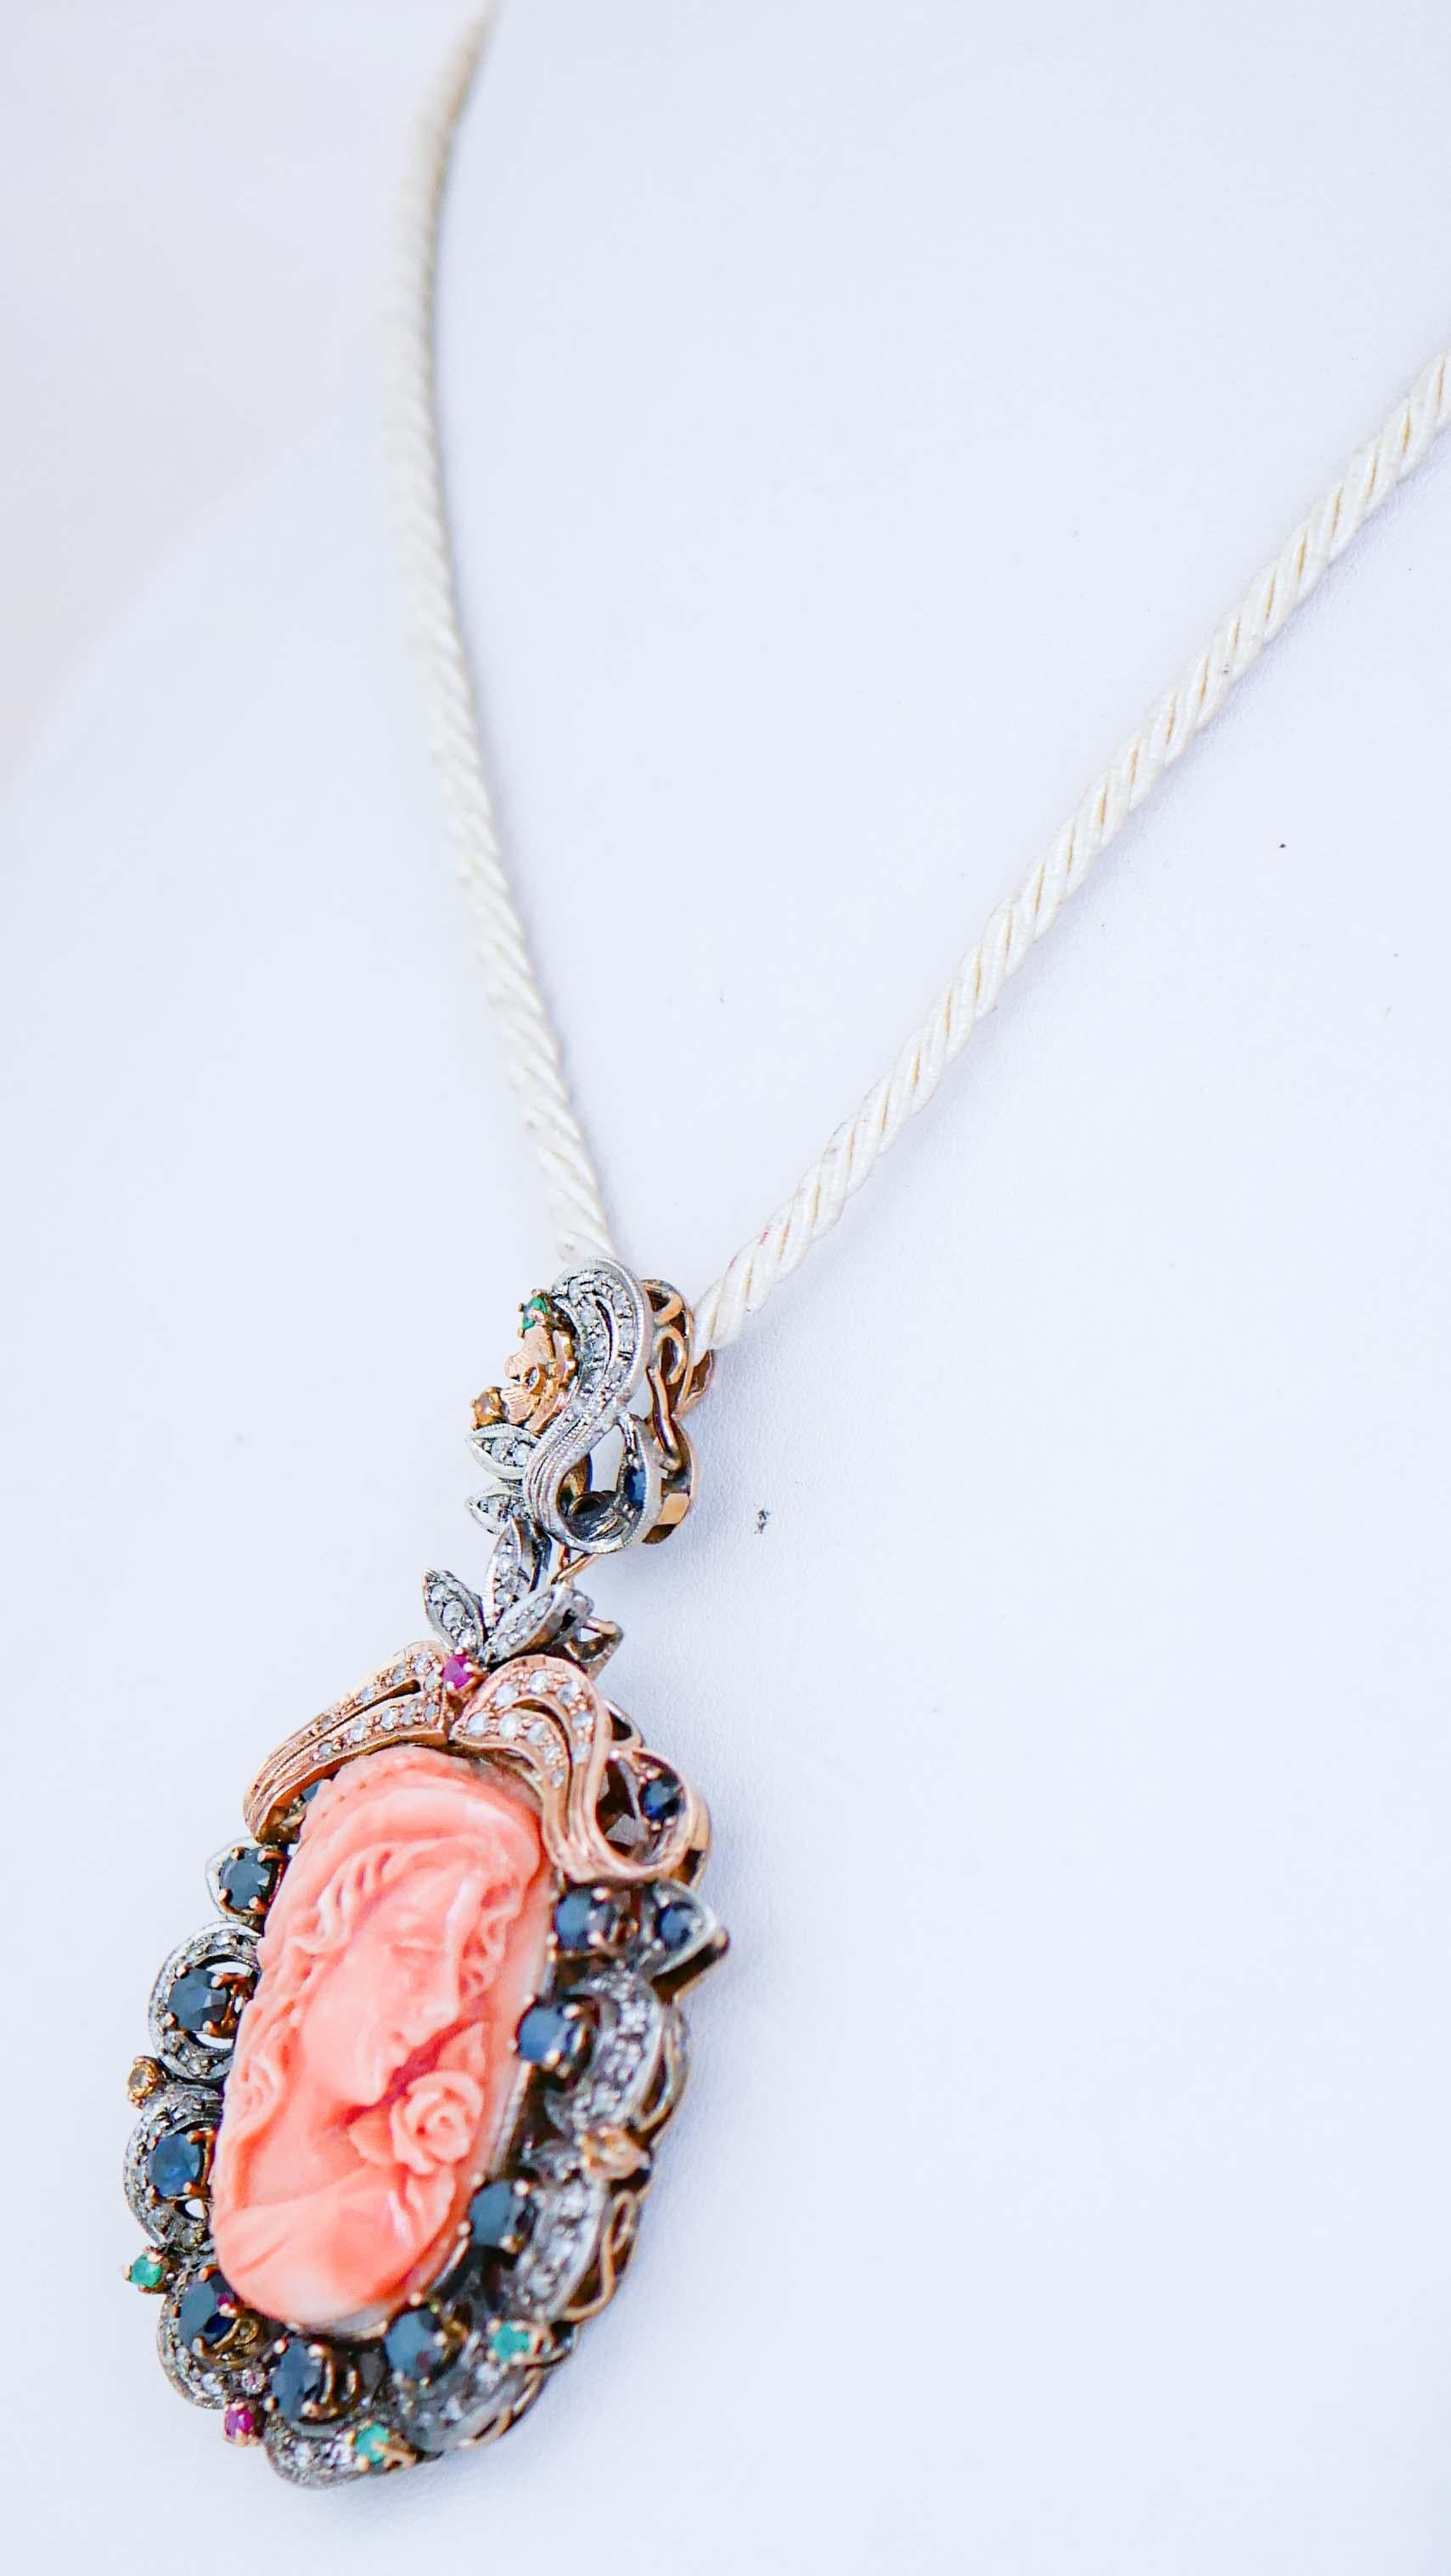 Retro Coral, Diamonds, Sapphires, Rubies, Emeralds, Rose Gold and Silver Pendant.